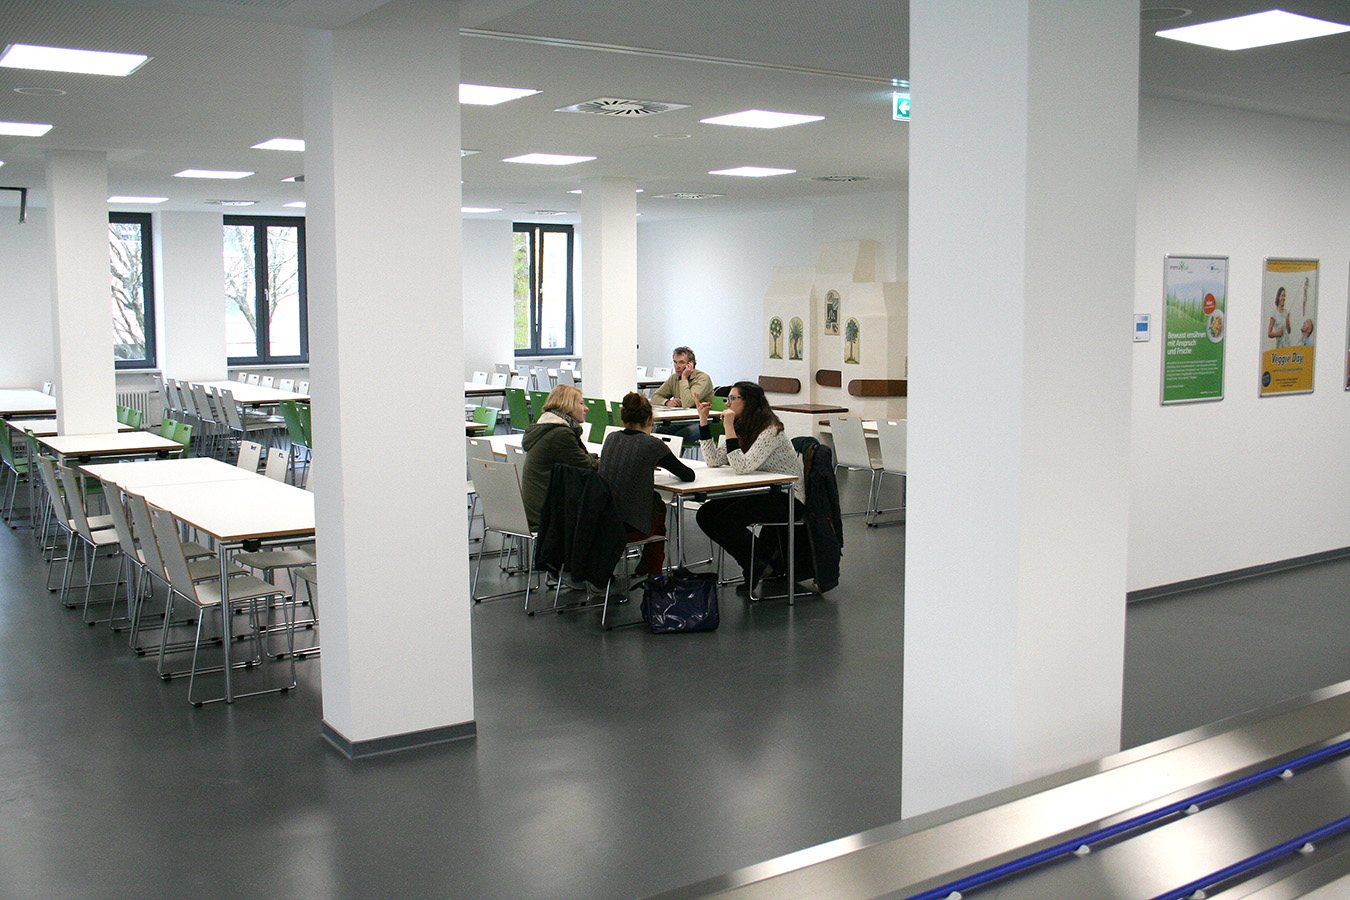 The newly renovated cafeteria has a light and friendly atmosphere with space for 600 guests. (Image: FAU/Boris Mijat)